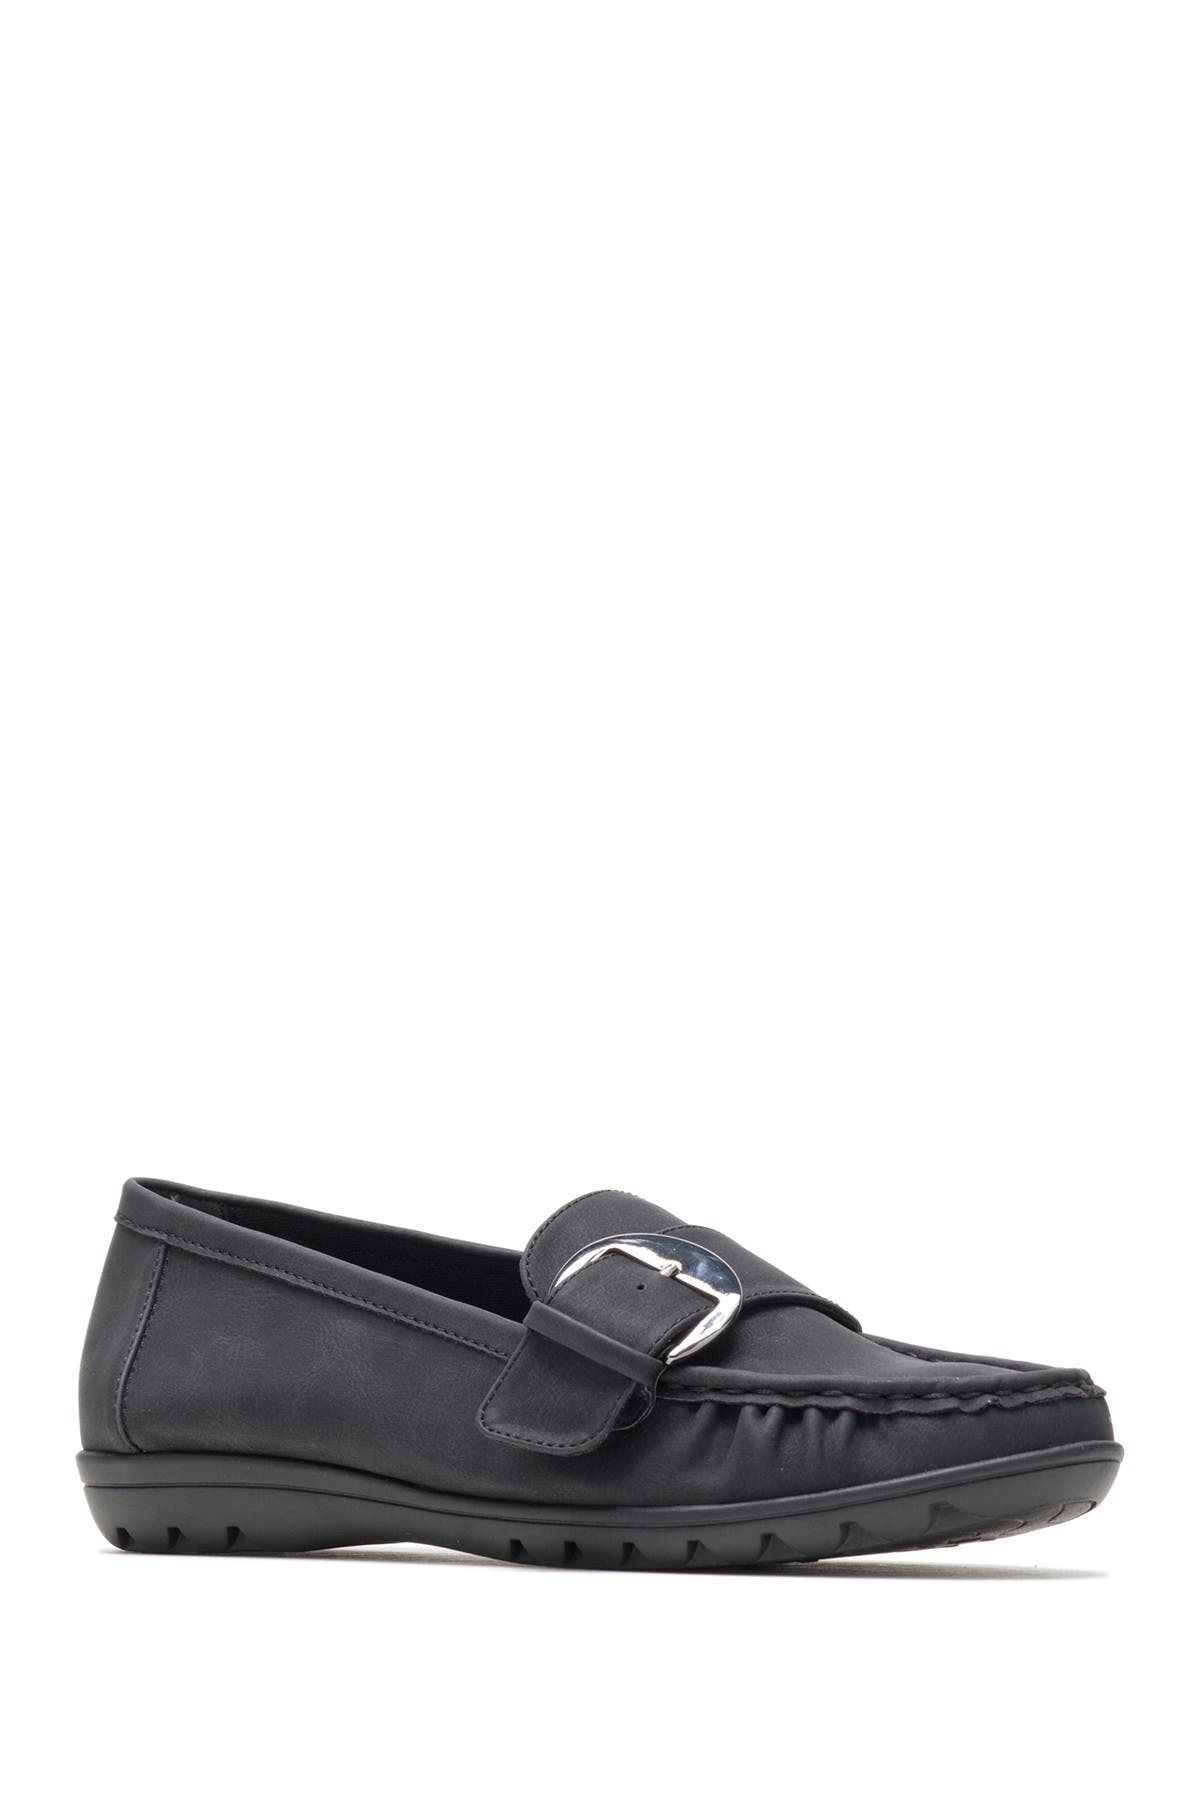 hush puppies black loafers